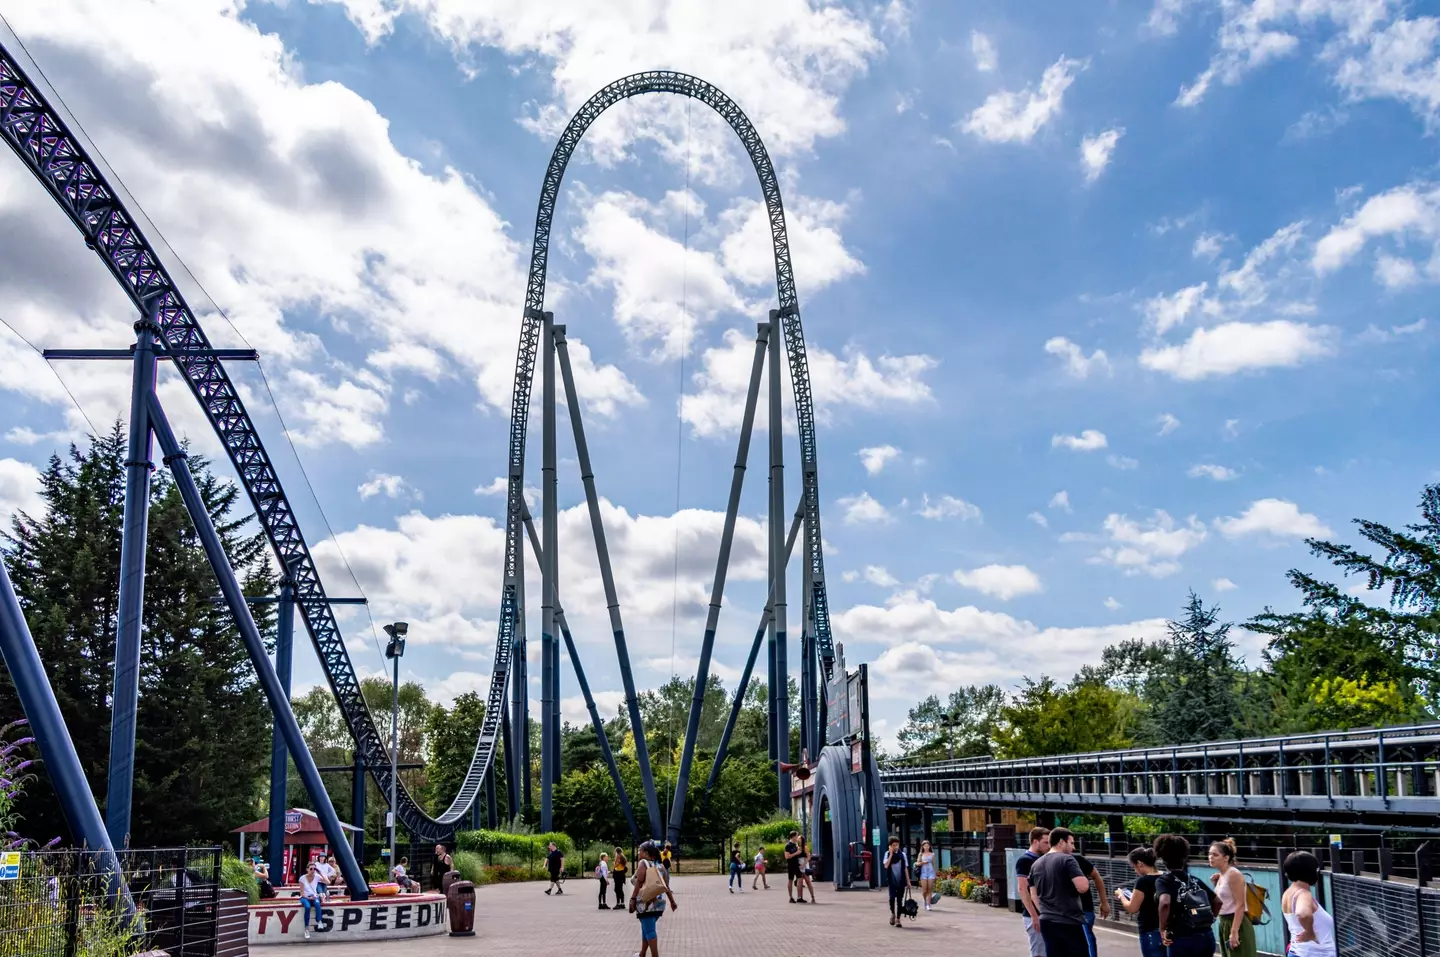 Stealth is the UK's fastest ride according to Thorpe Park.